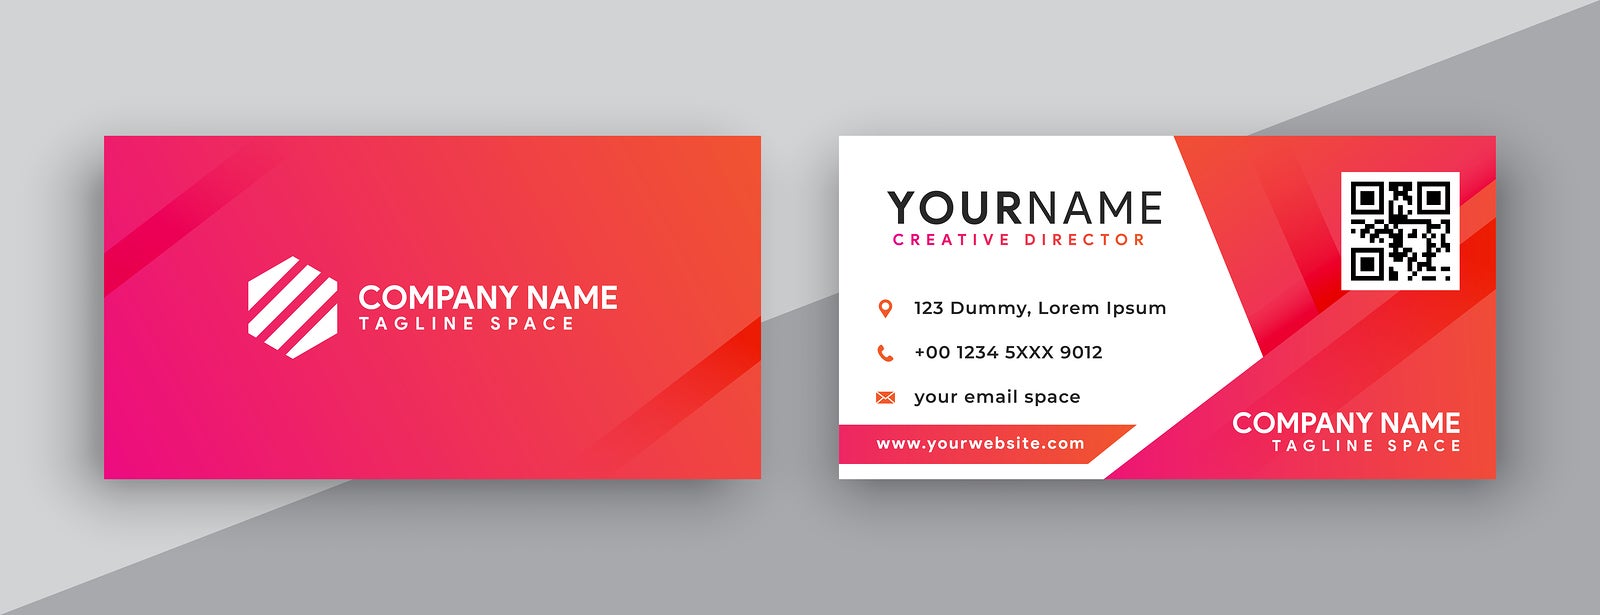 business card. modern business card design . double sided business card design template . flat orange gradation business card inspiration. custom business card template design. new business card collection. You can edit the cards by adding your name